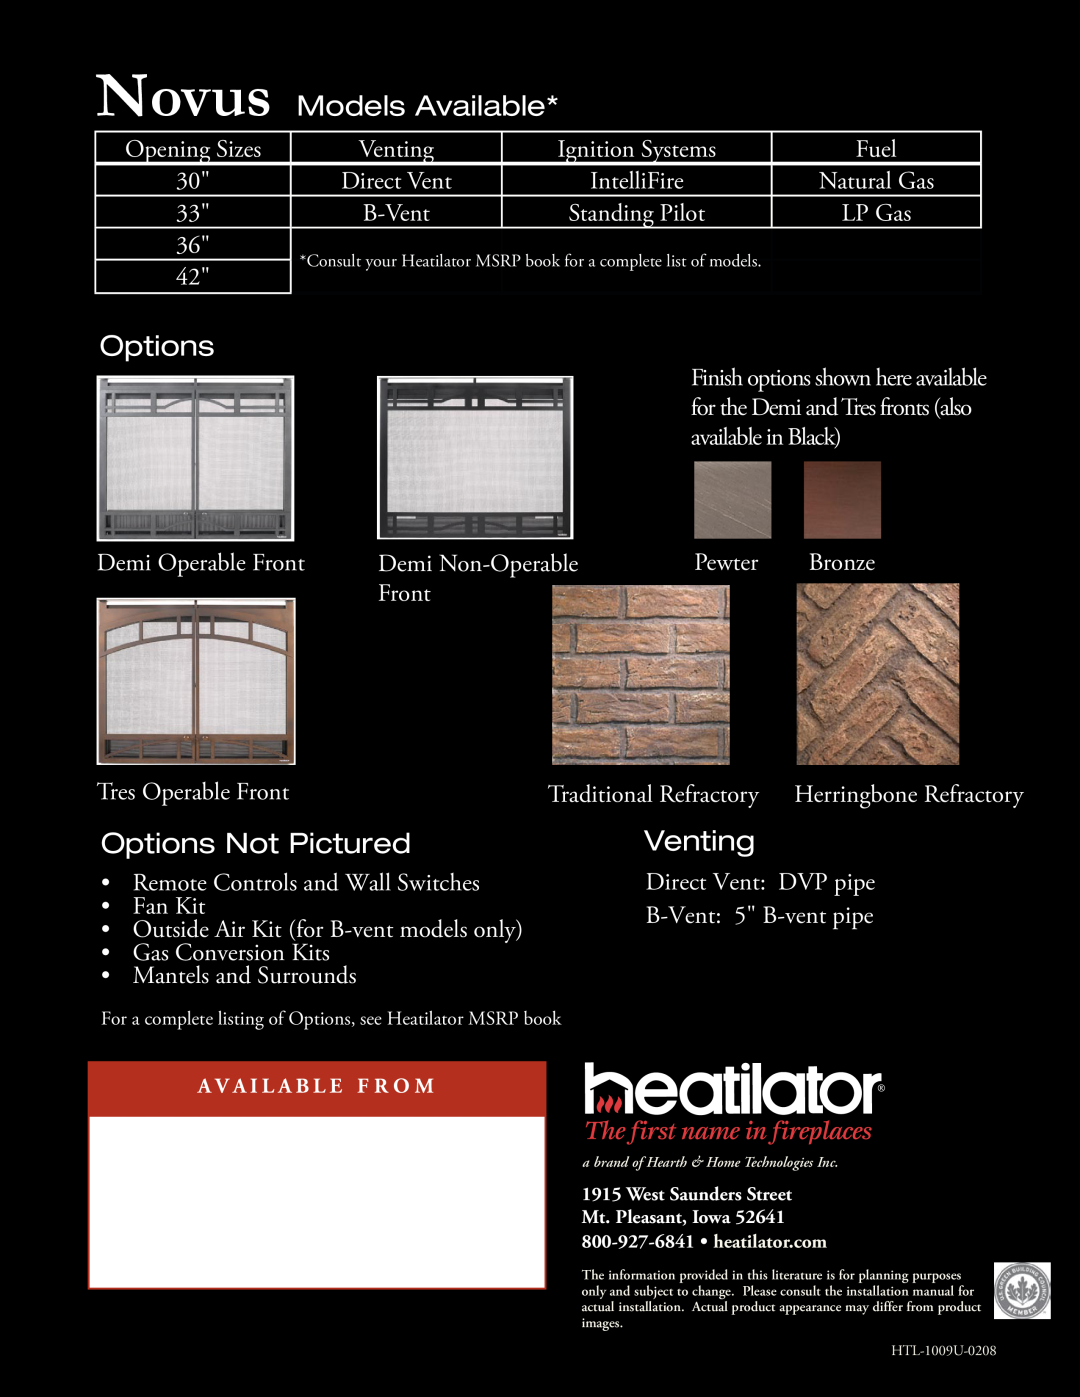 Hearth and Home Technologies manual Novus Models Available, Options Not Pictured, Venting 